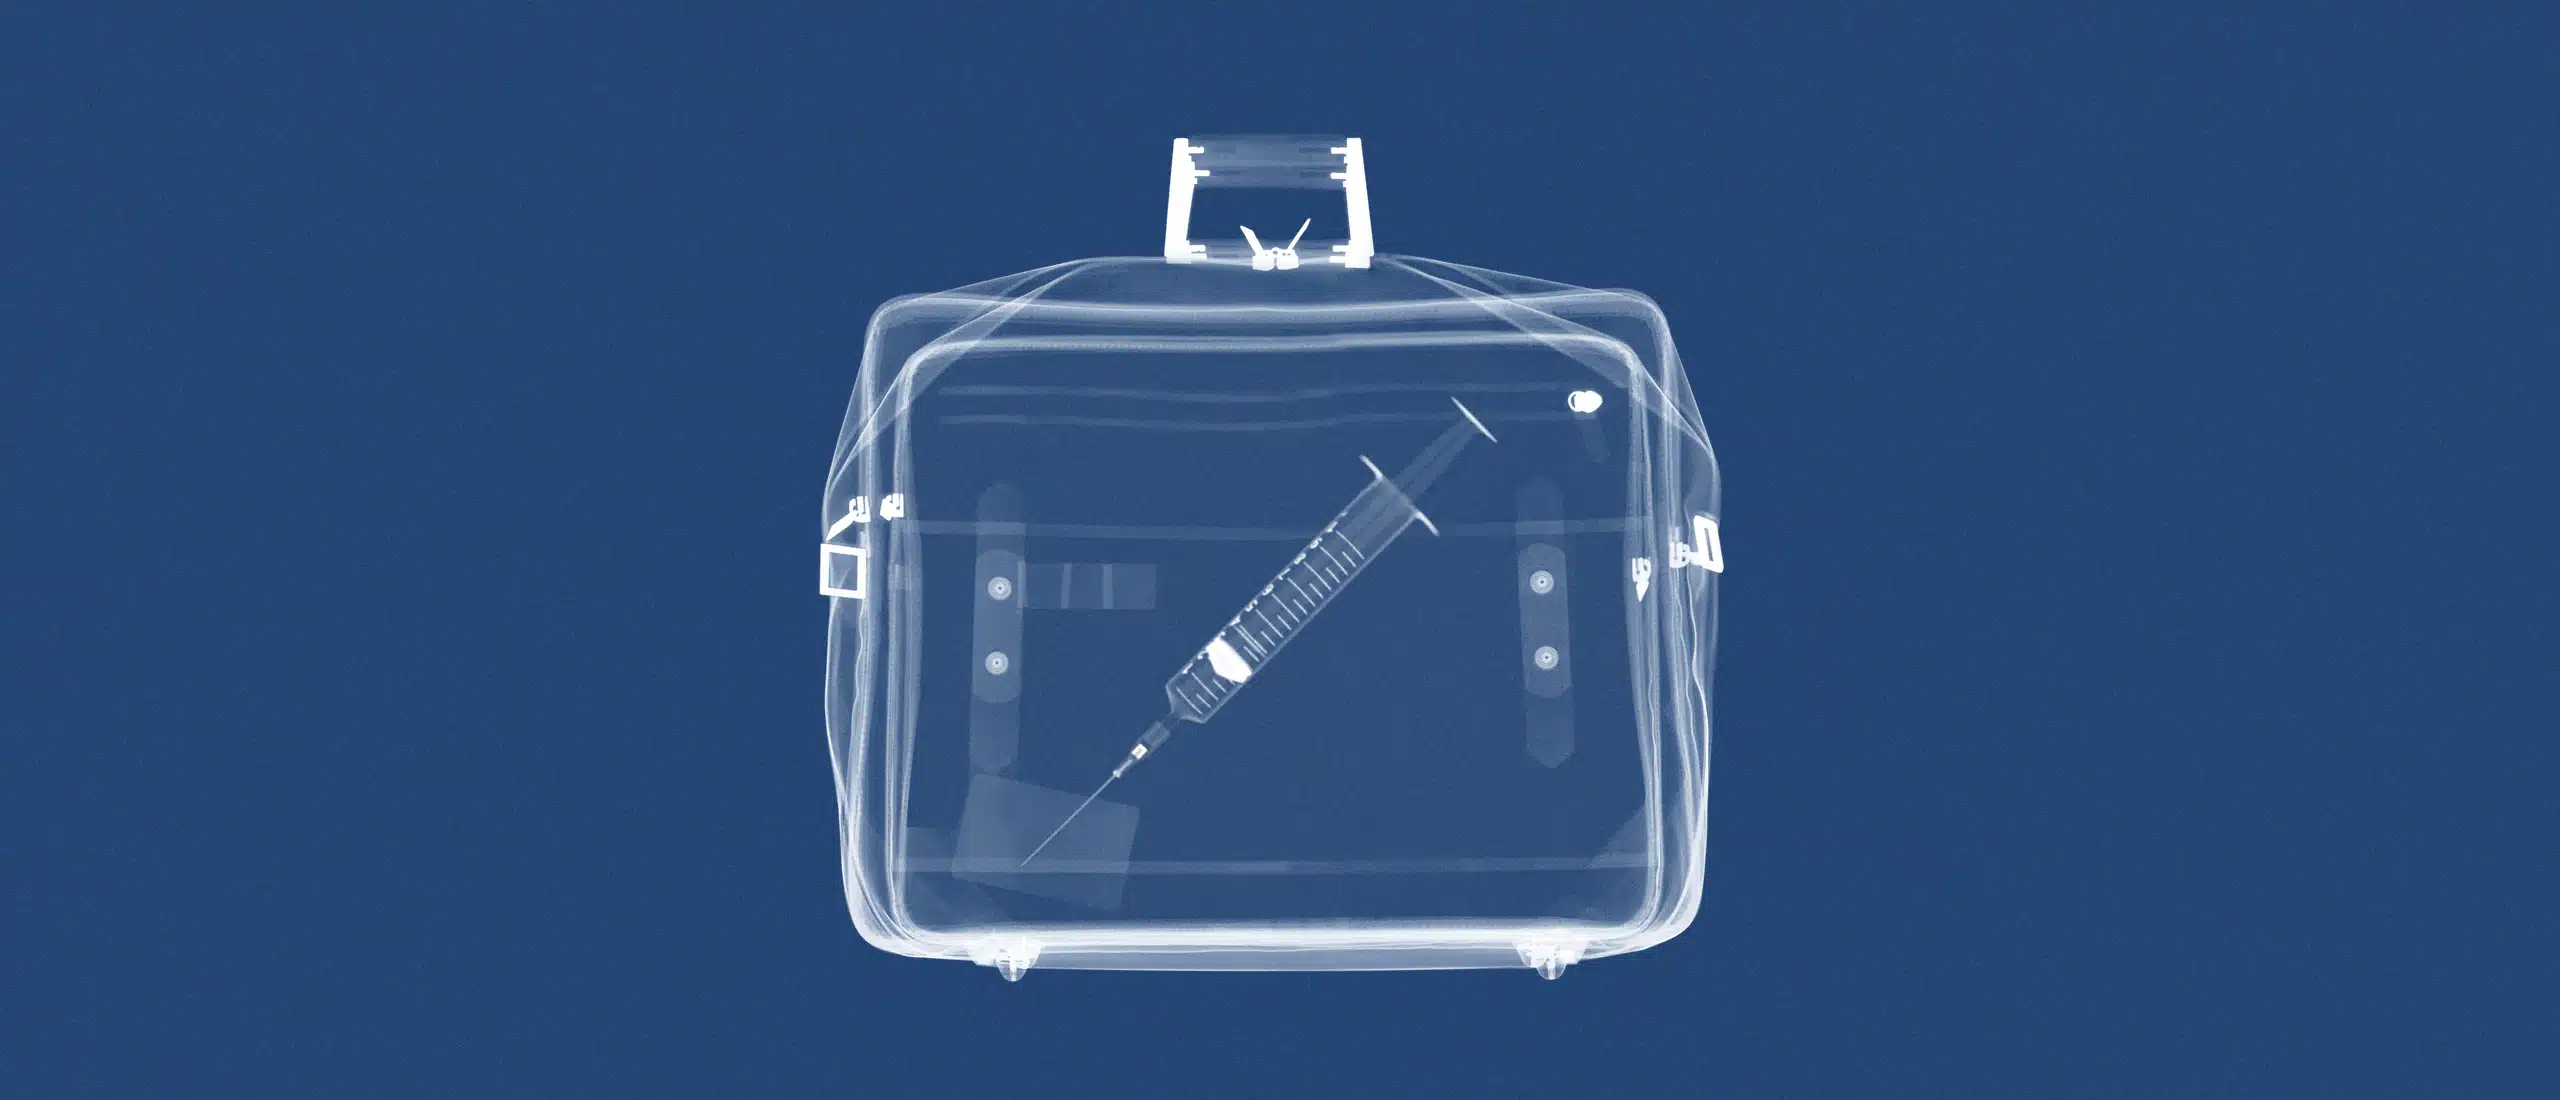 syringe in a briefcase under an x-ray